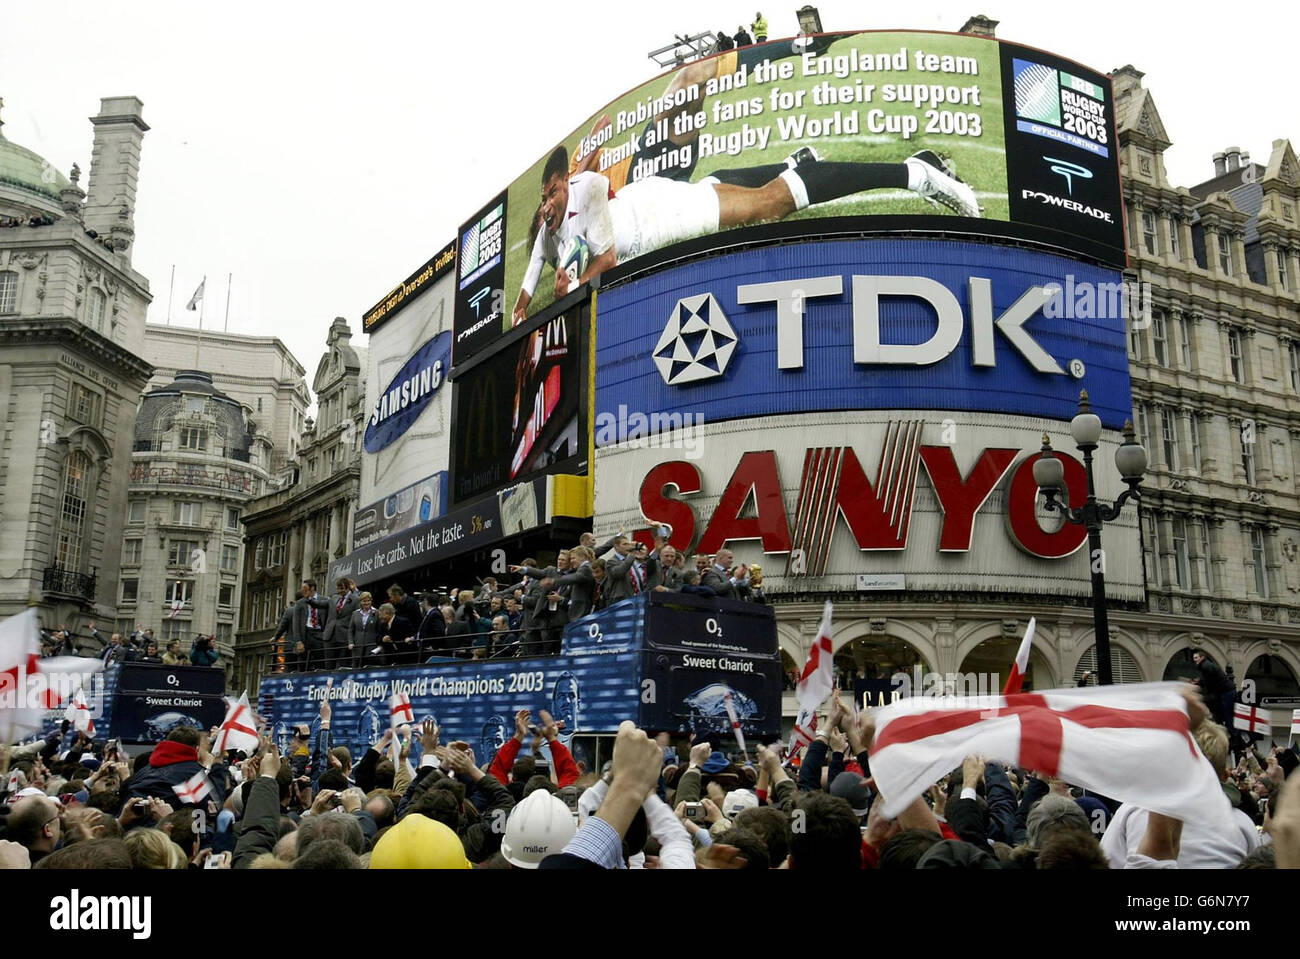 The England Rugby World Cup team during the victory parade in central London. The two open-topped buses arrived outside the National Gallery to a rapturous welcome from thousands of fans.The square was a sea of red and white flags as the nation's heroes waved to fans. Stock Photo